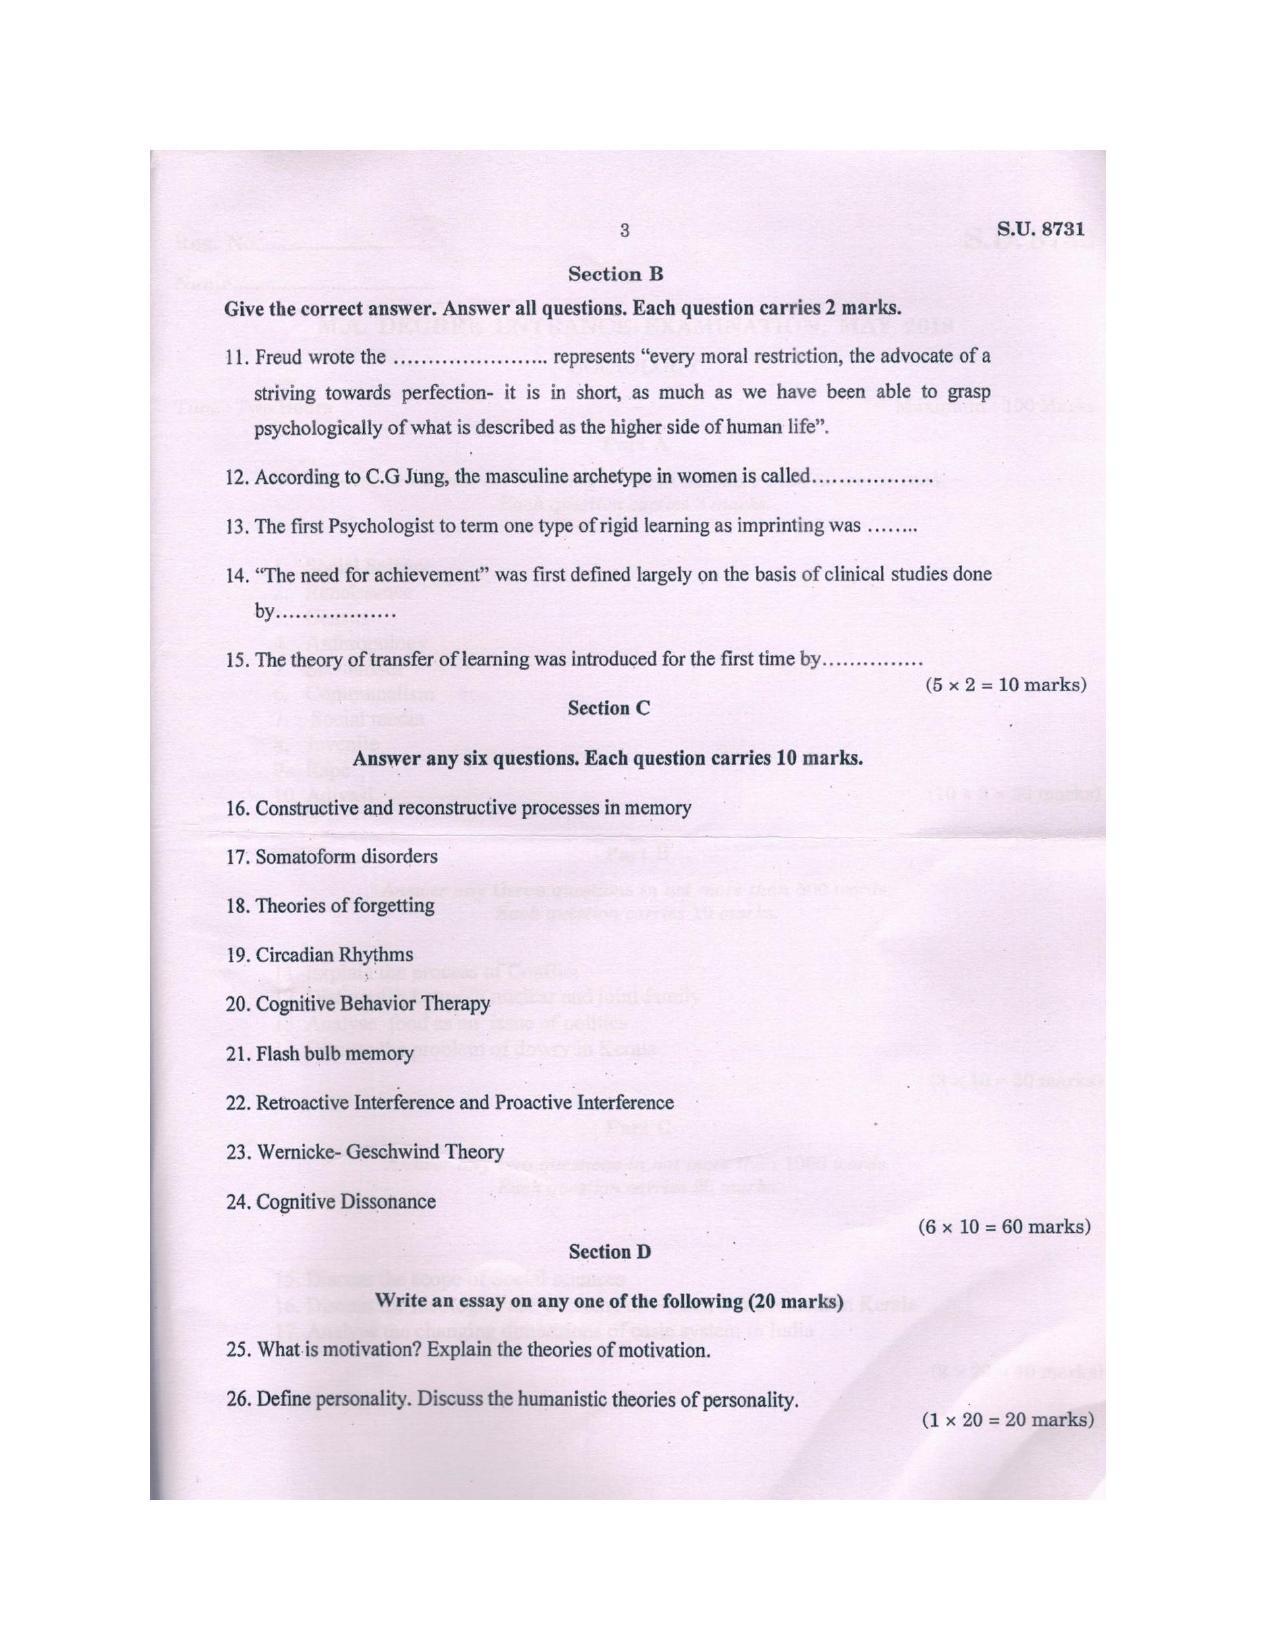 SSUS Entrance Exam PSYCHOLOGY 2018 Question Paper - Page 3